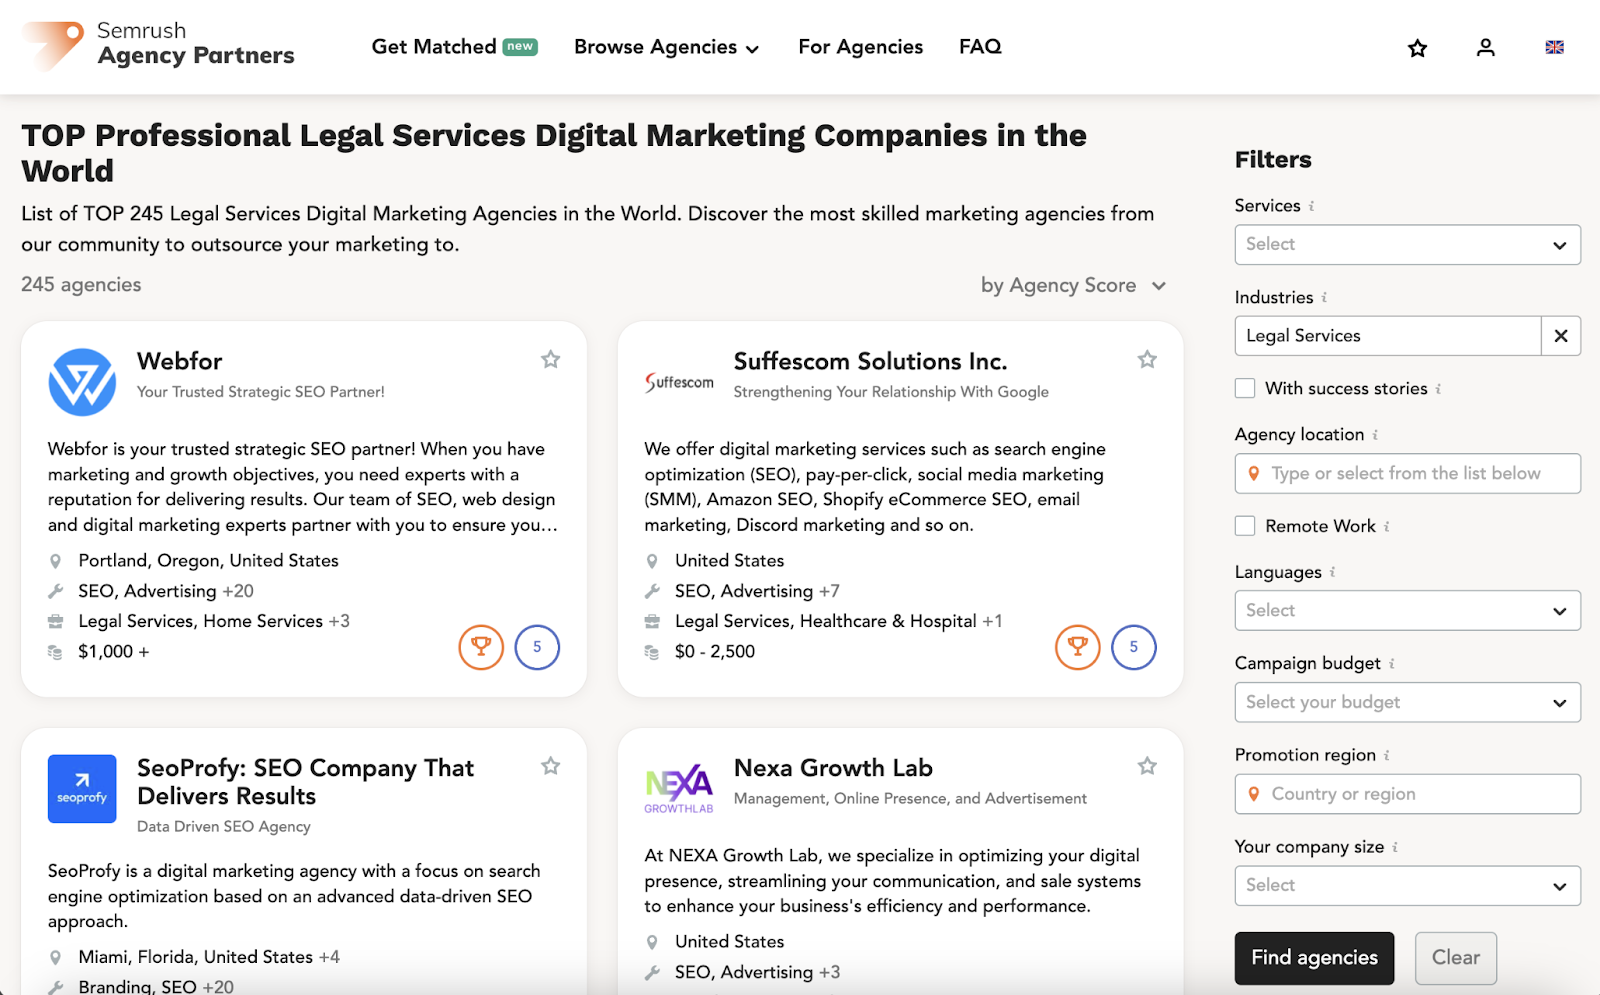 Semrush Agency Partners' page showing "TOP Professional Legal Services Digital Marketing Companies in the World"